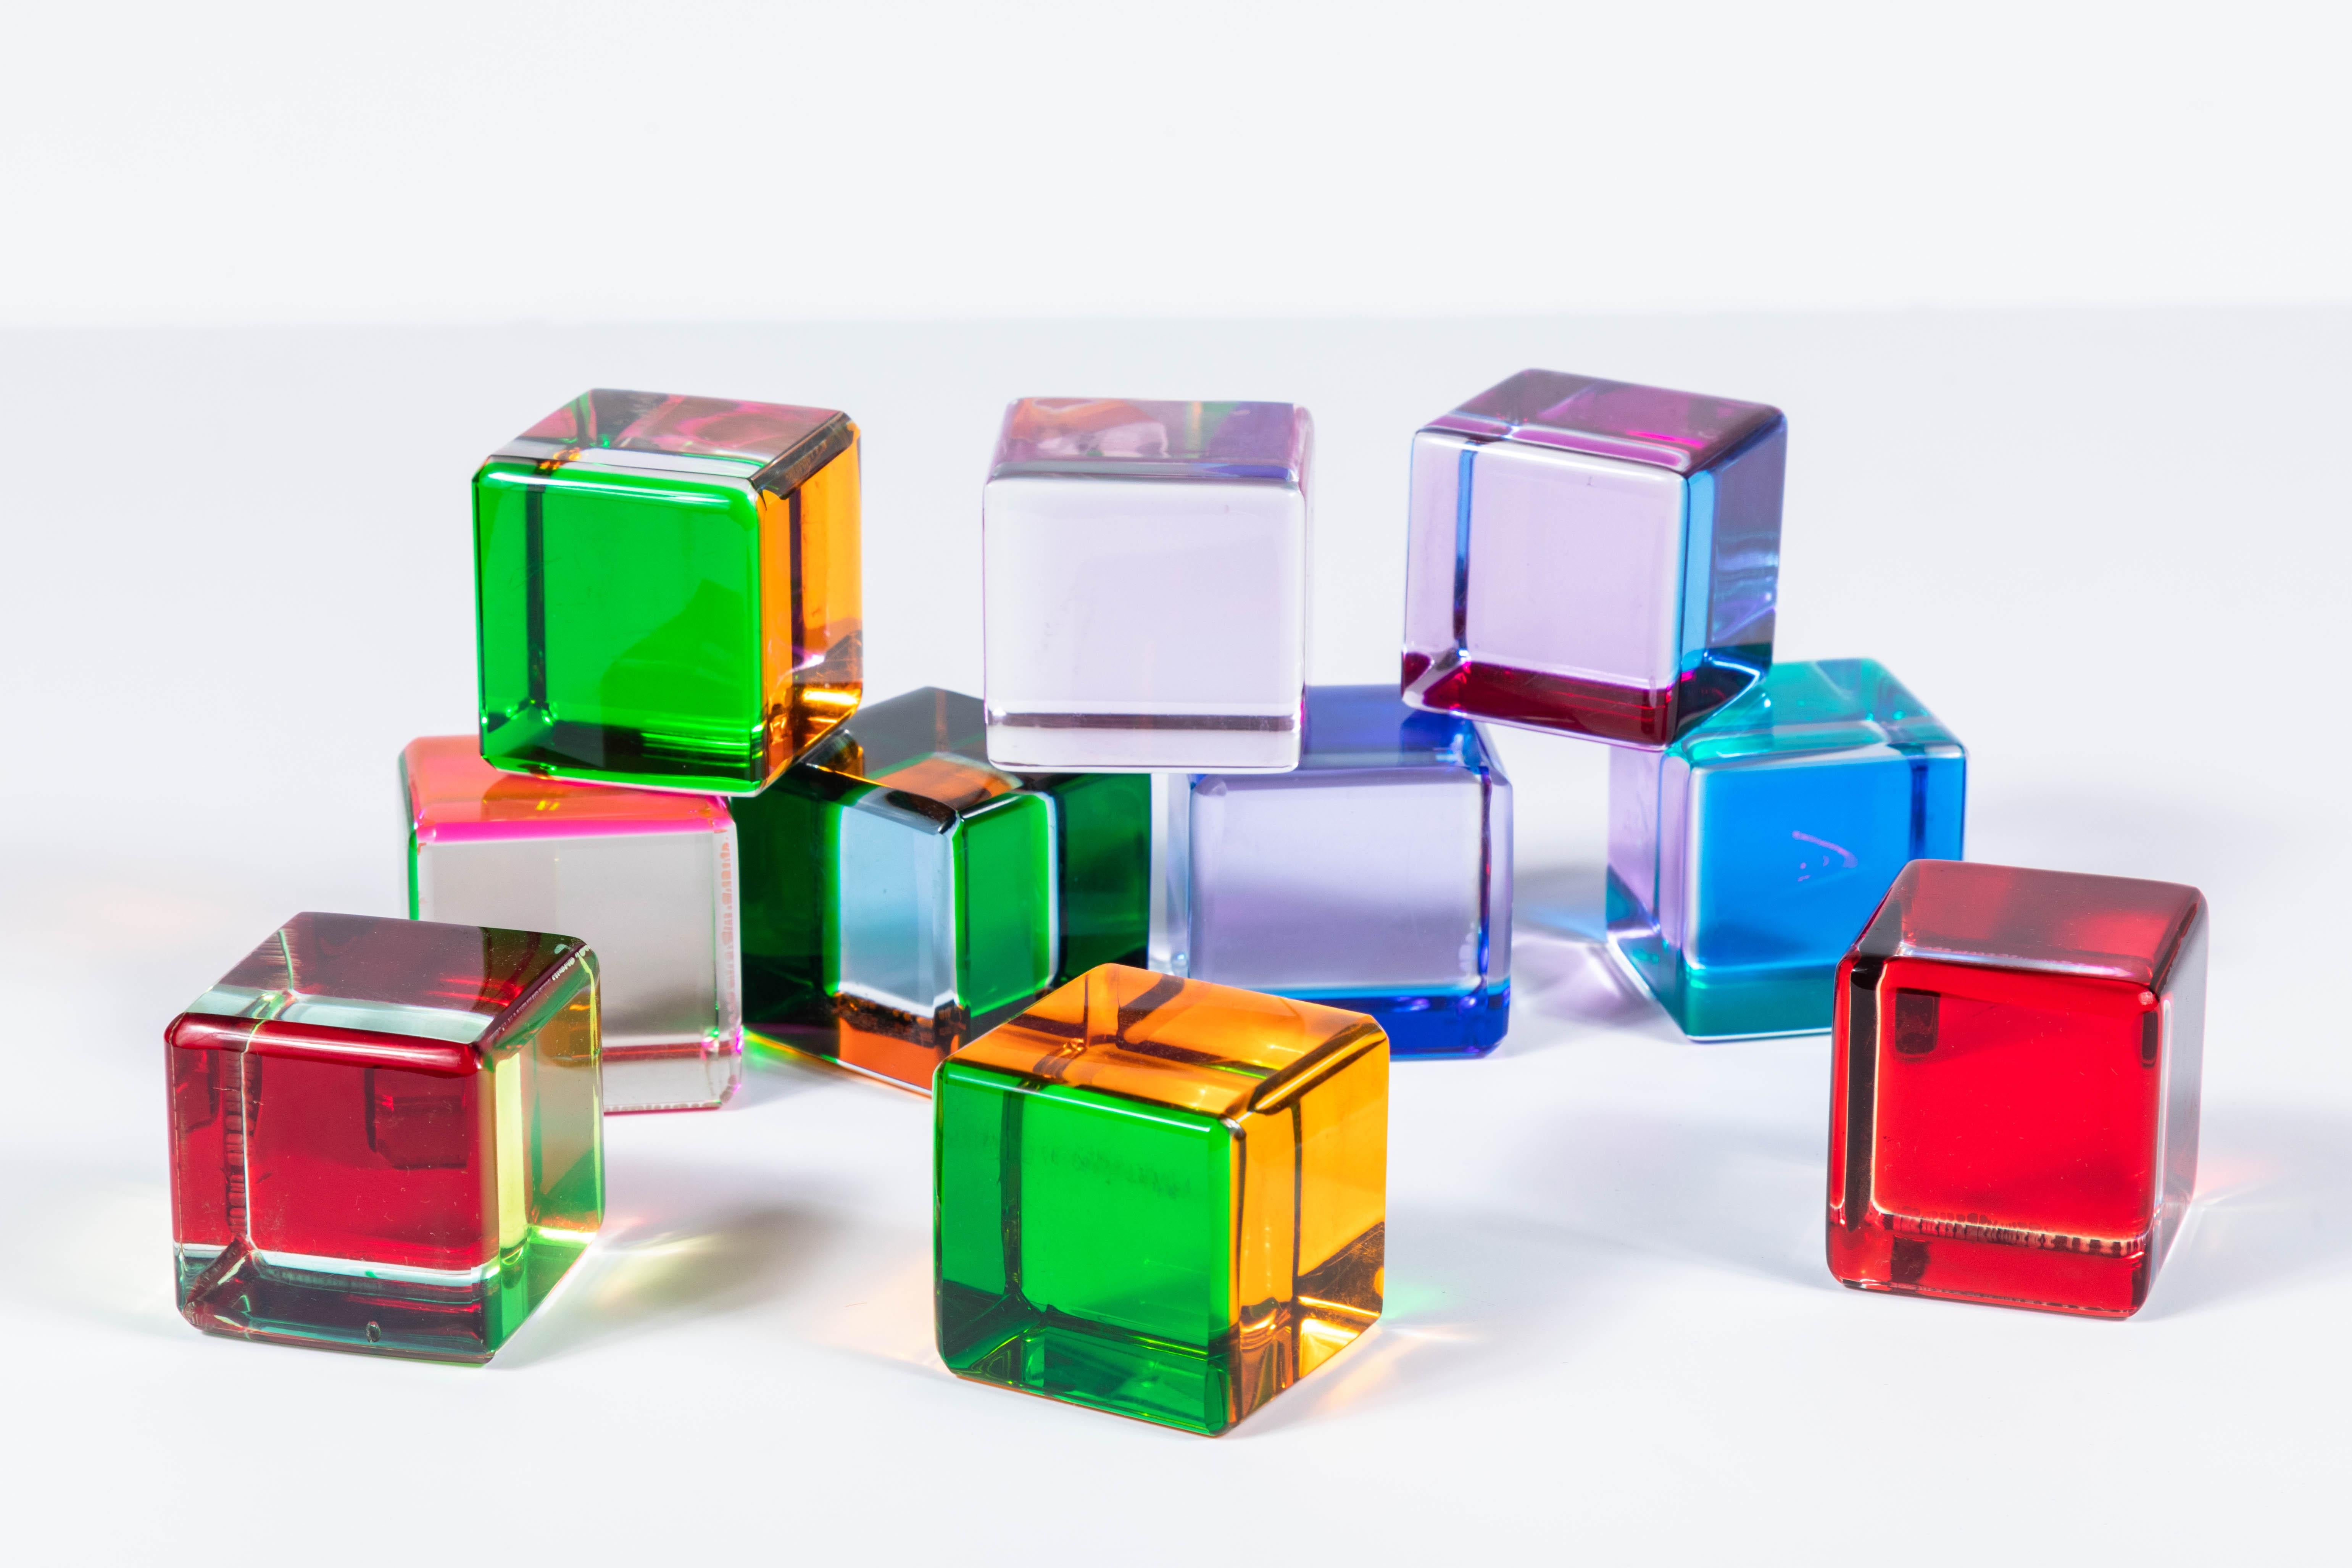 colored acrylic cubes